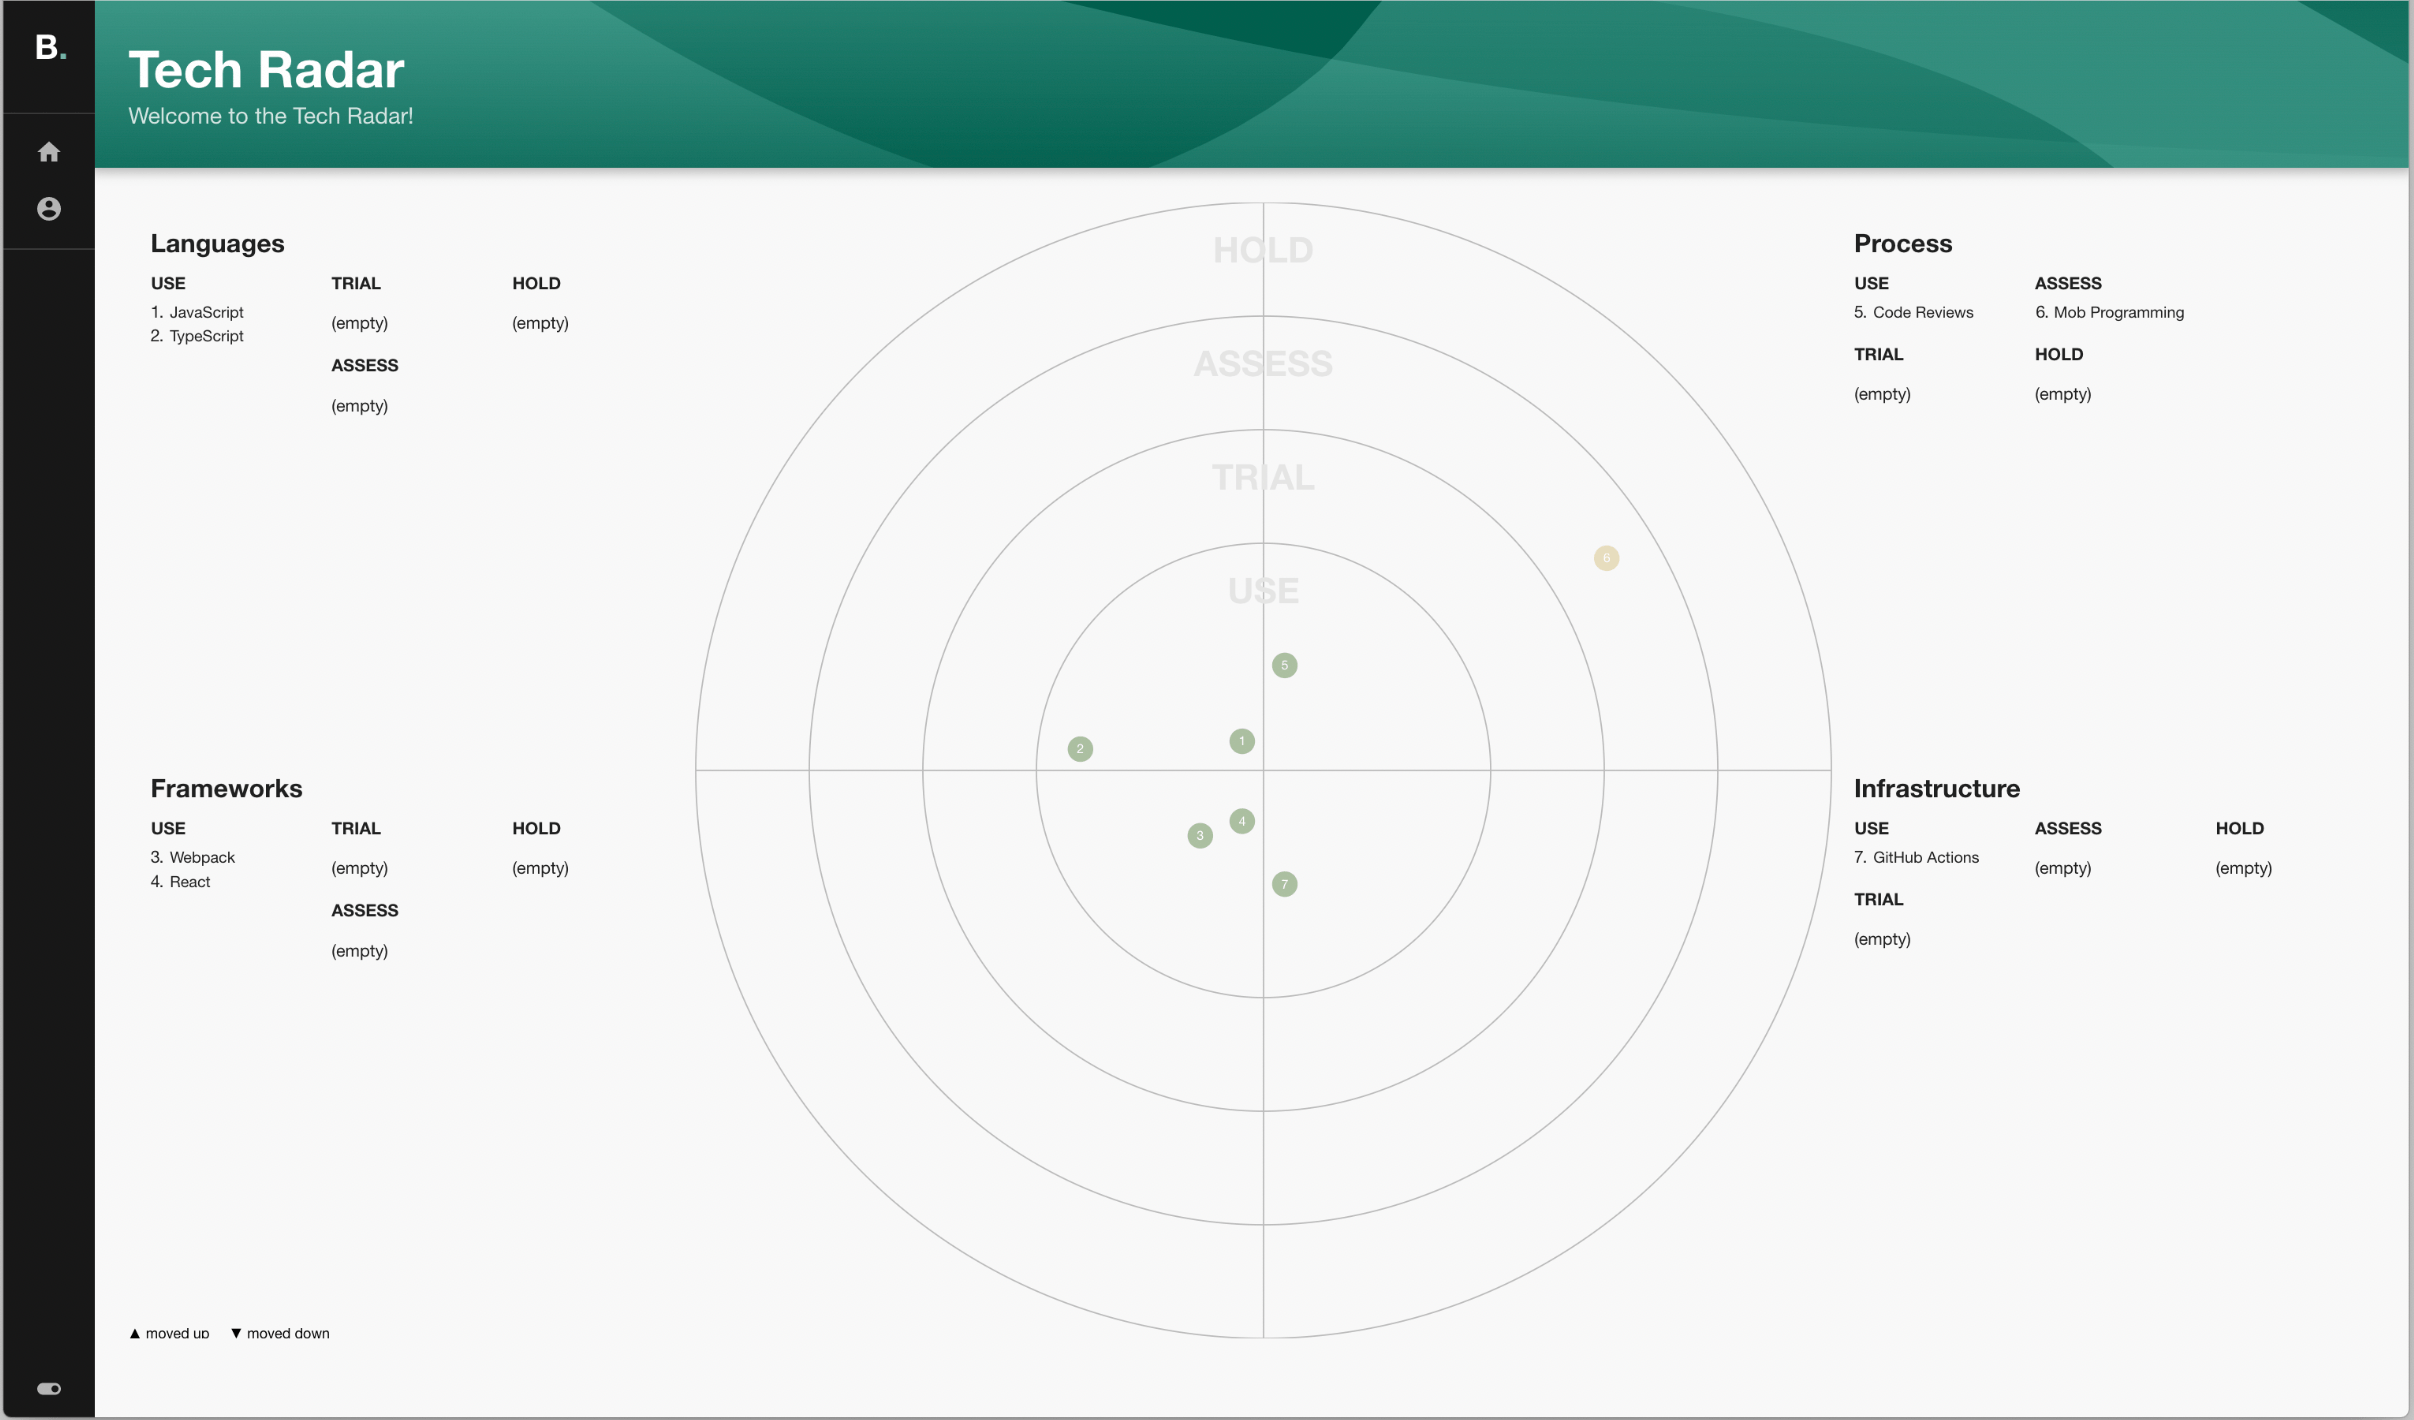 Home page of the Tech Radar plugin showing circular visualization of usage with the categories "use", "trial", "assess", and "hold". Categories around the visualization are shown for "Languages", "Frameworks", "Process", and "Infrastructure" with examples under each.